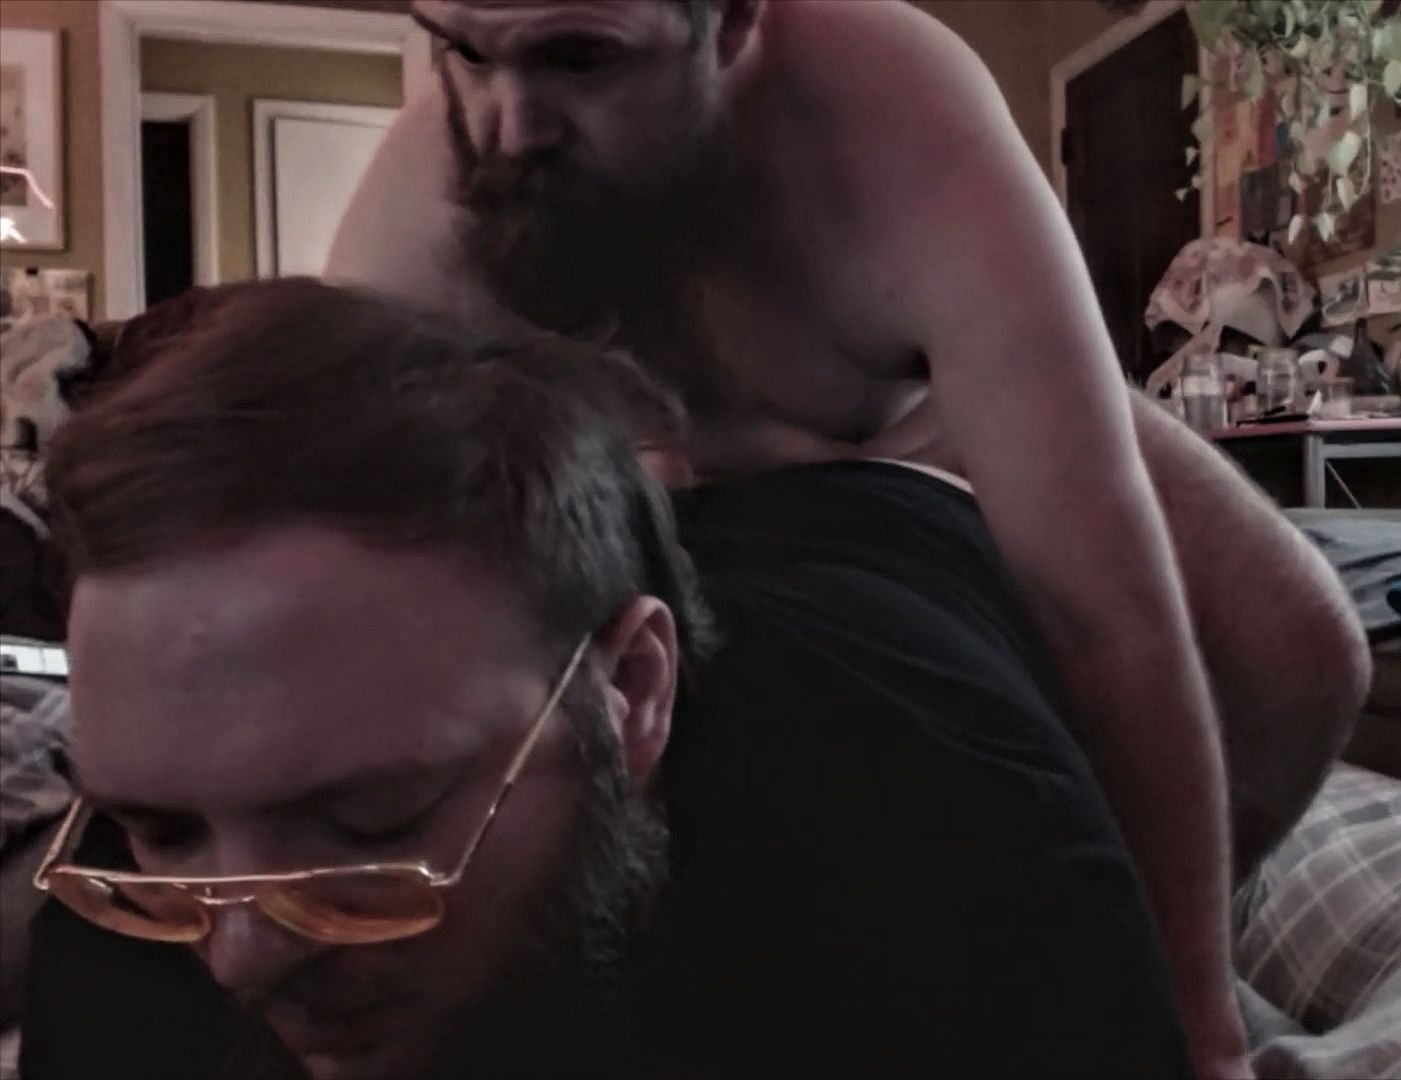 Bubbas doing gay stuff with cock and ass and butts and dick #4